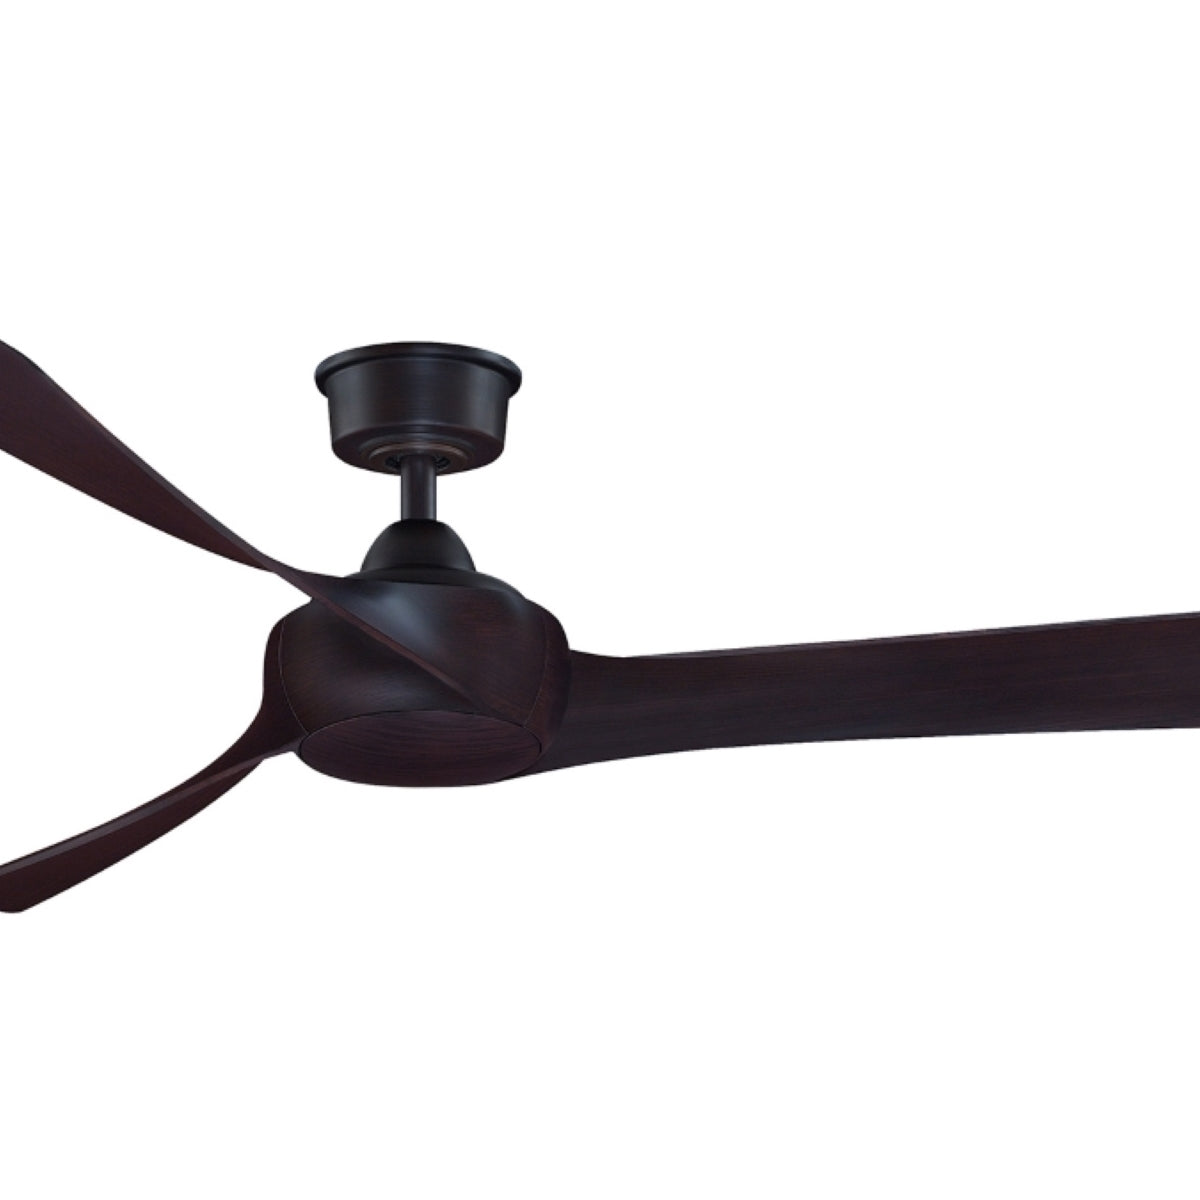 Wrap Custom Indoor/Outdoor Ceiling Fan Motor With Remote, 44-60" Blades Sold Separately